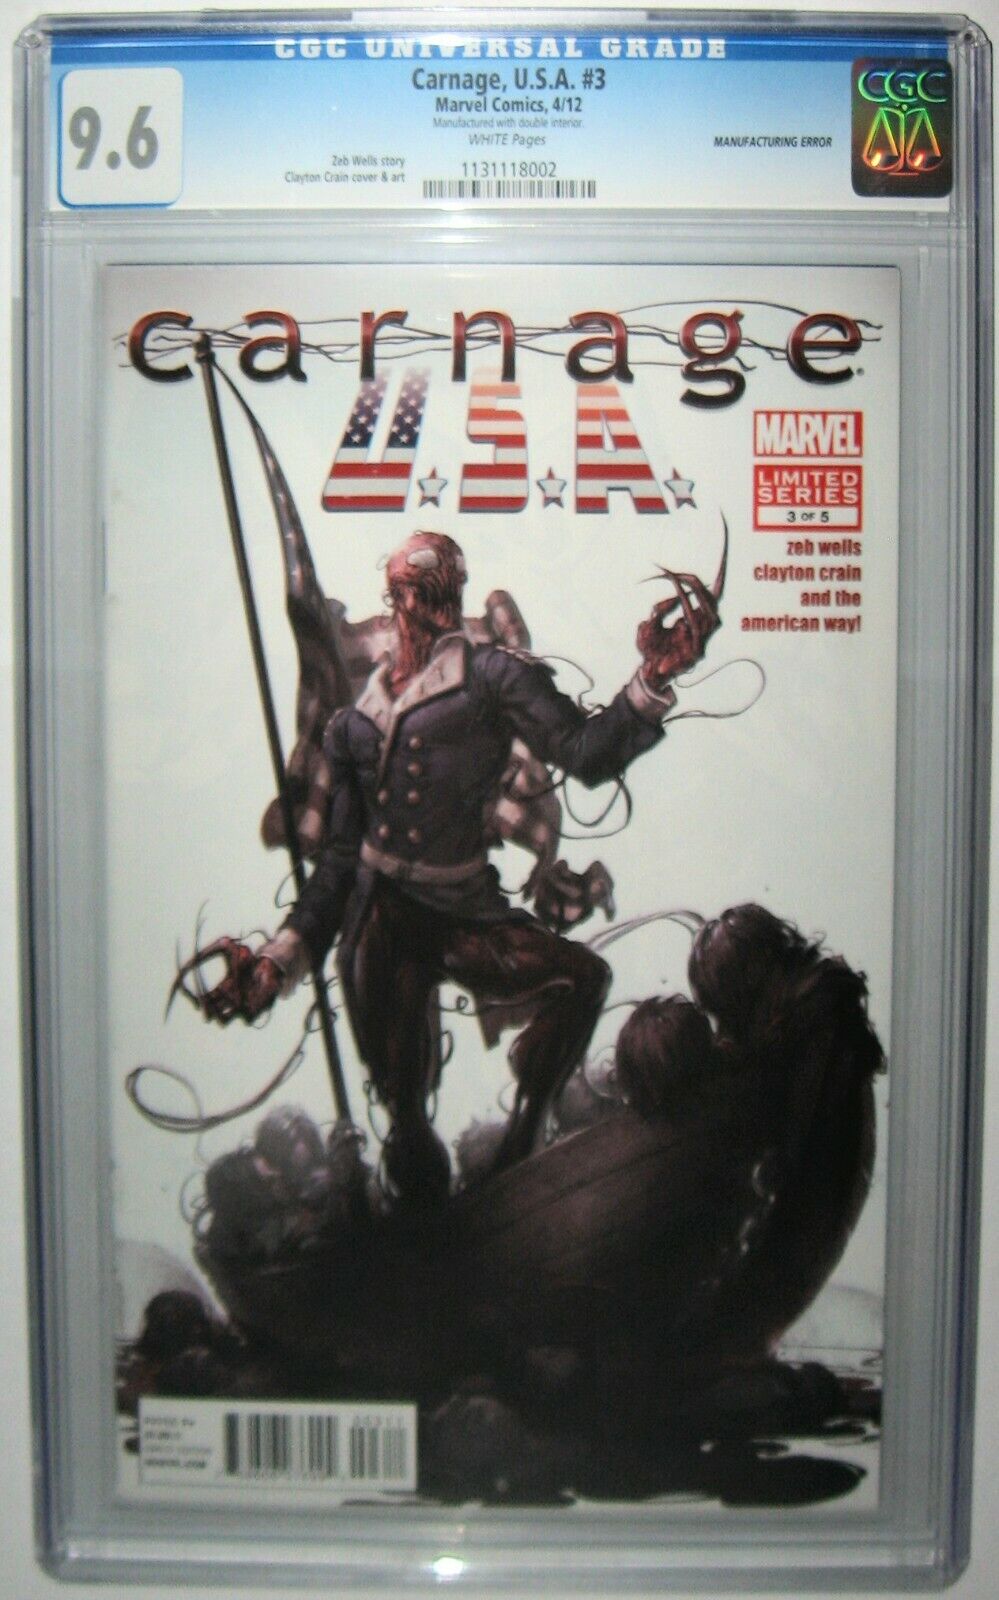 Carnage U.S.A. USA #3 CGC 9.6 PRINT ERROR DOUBLE INTERIOR GUTS White Pages 2012